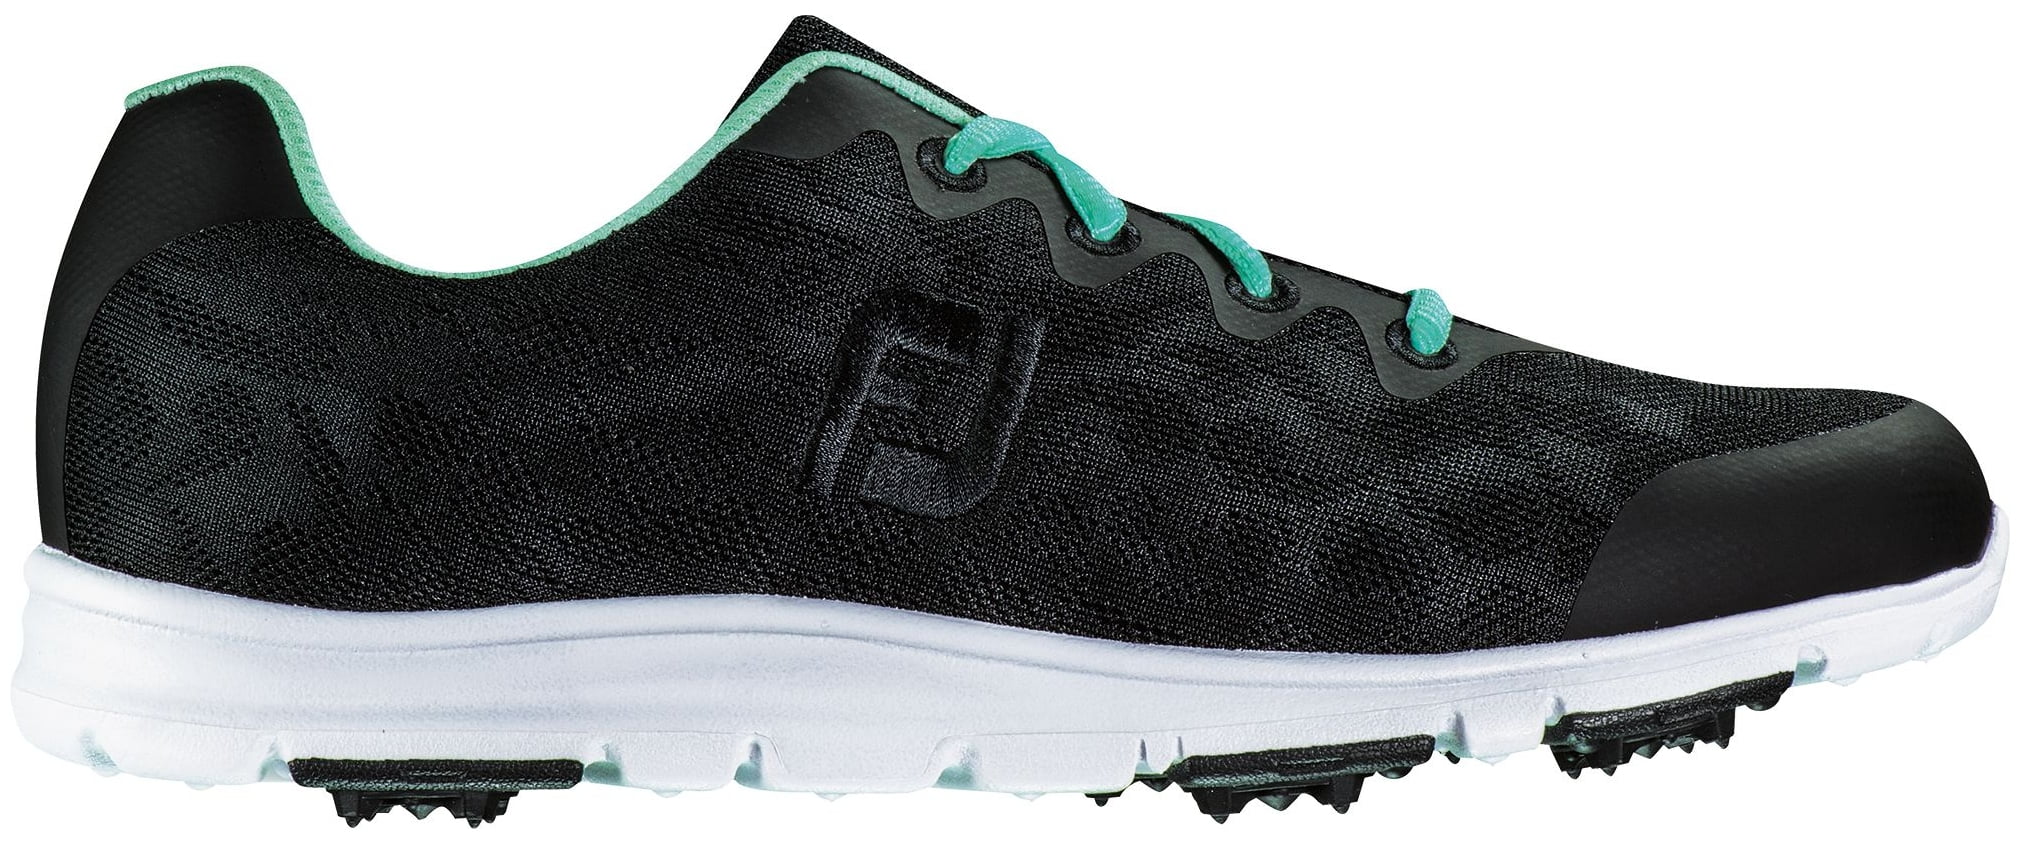 teal golf shoes